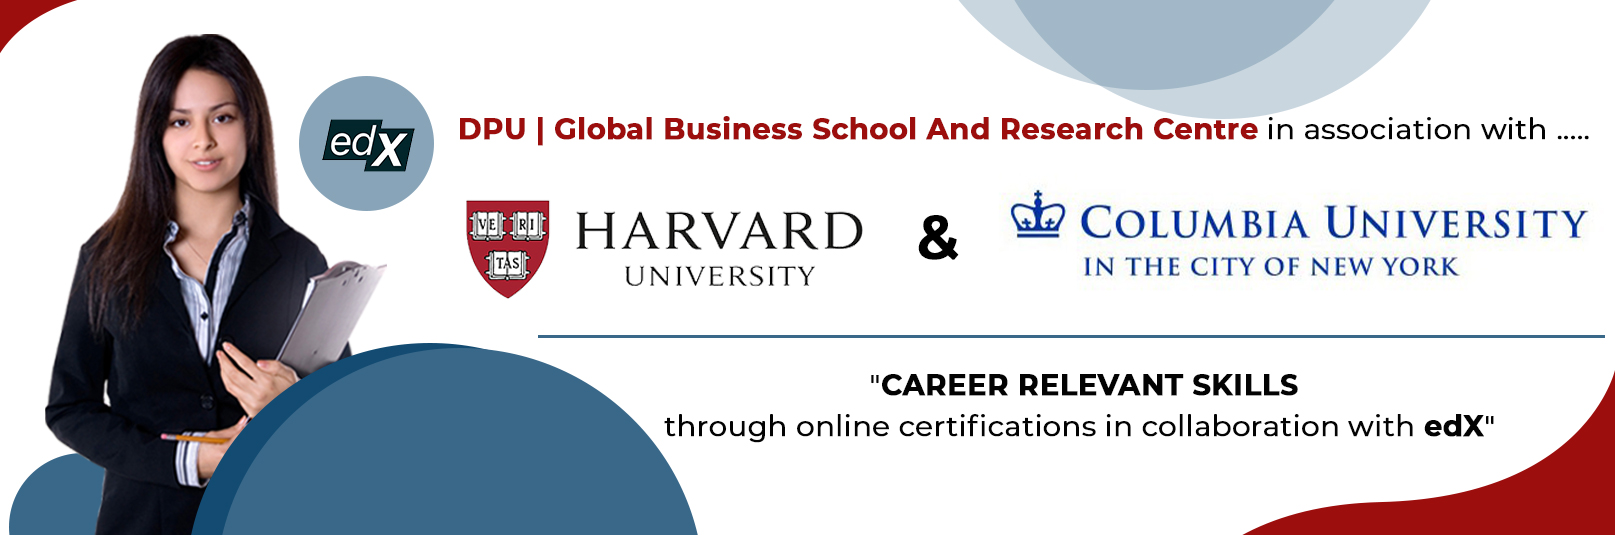 CAREER RELEVANT SKILLS through online certifications in collaboration with edX